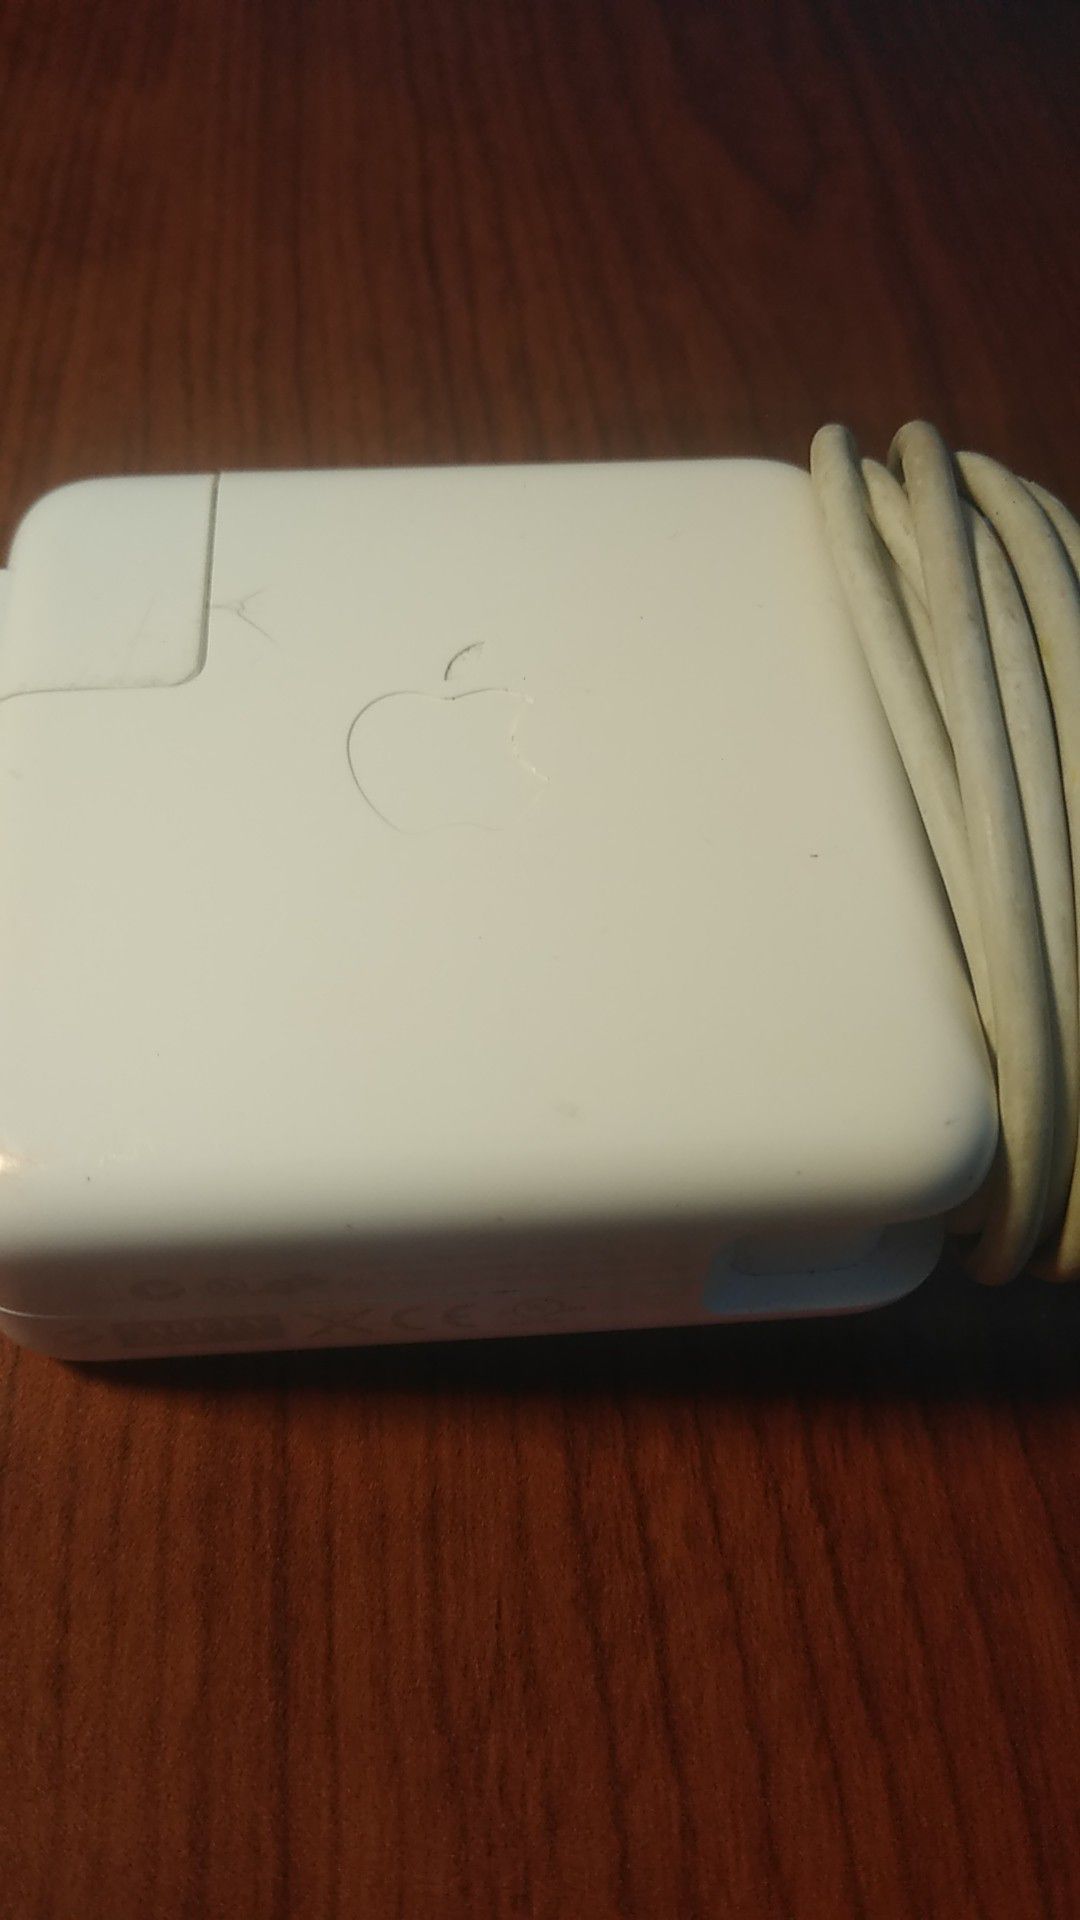 MacBook pro charger